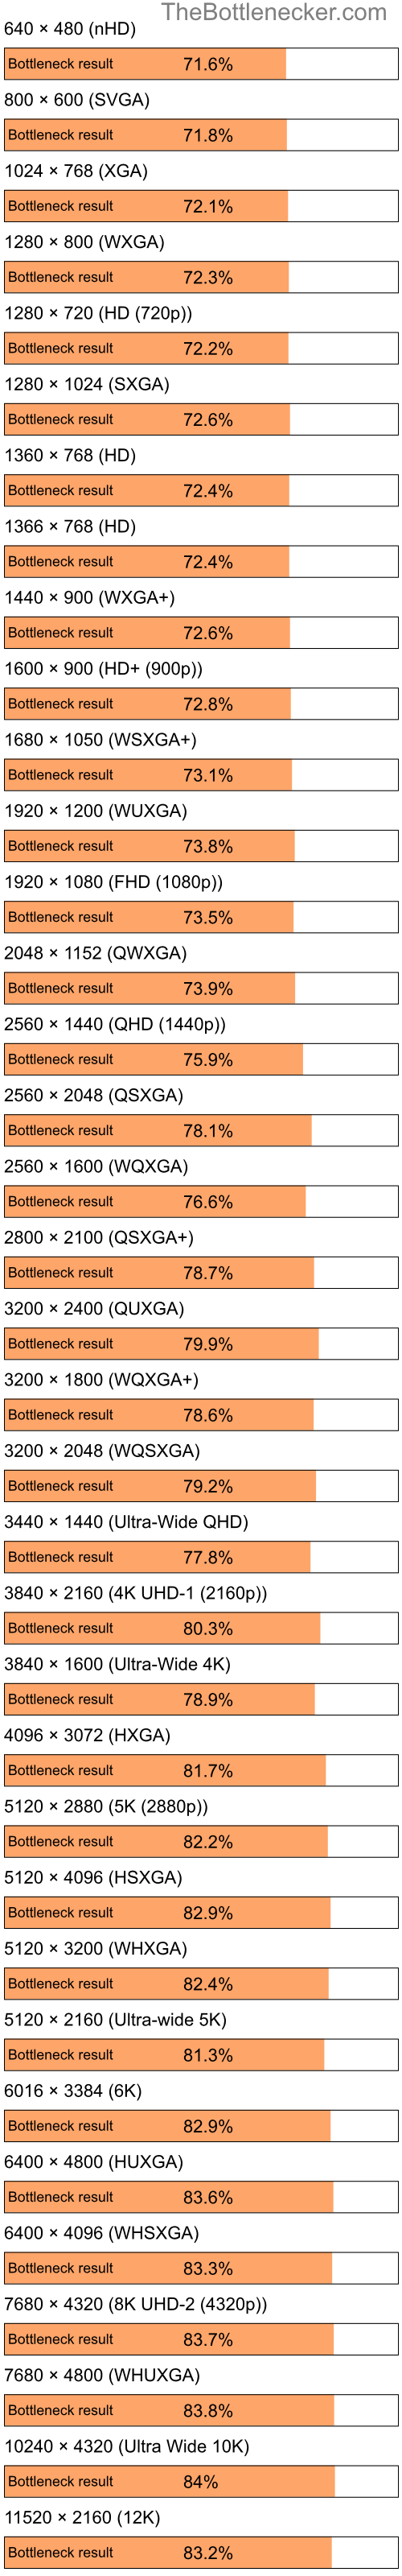 Bottleneck results by resolution for Intel Celeron M and AMD Radeon X1270 in Processor Intense Tasks